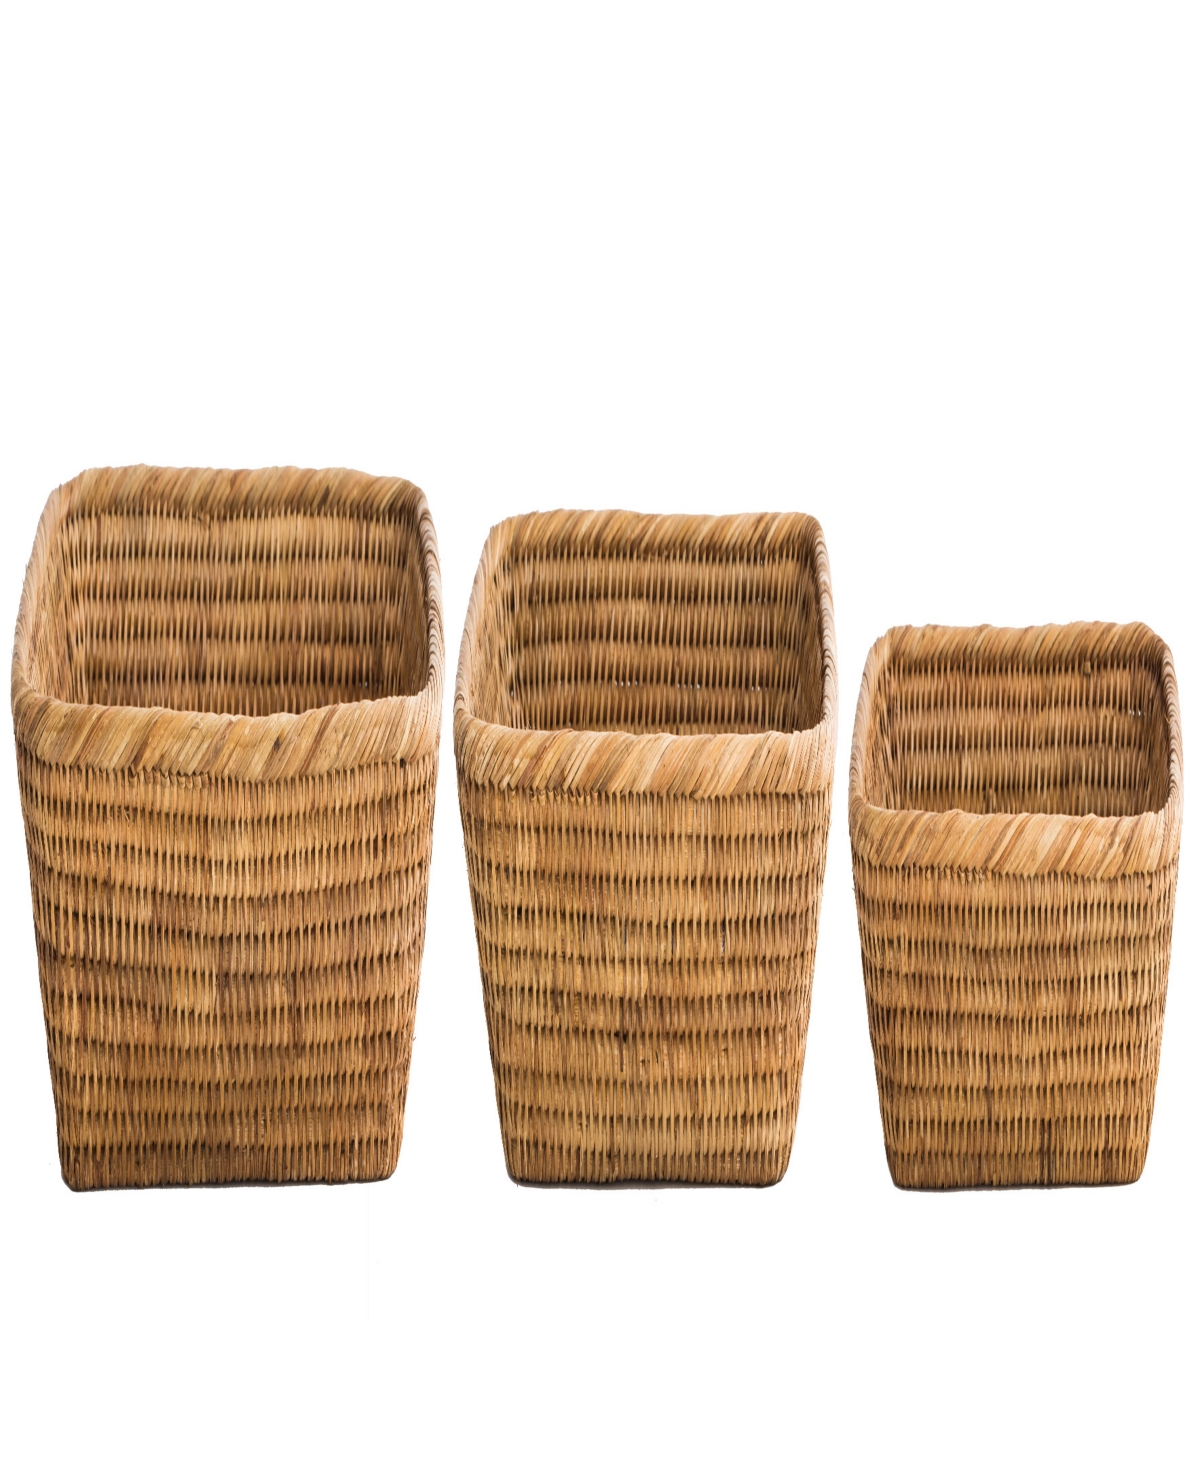 Artifacts Trading Company Artifacts Rattan 3-piece Basket Set In Honey Brown